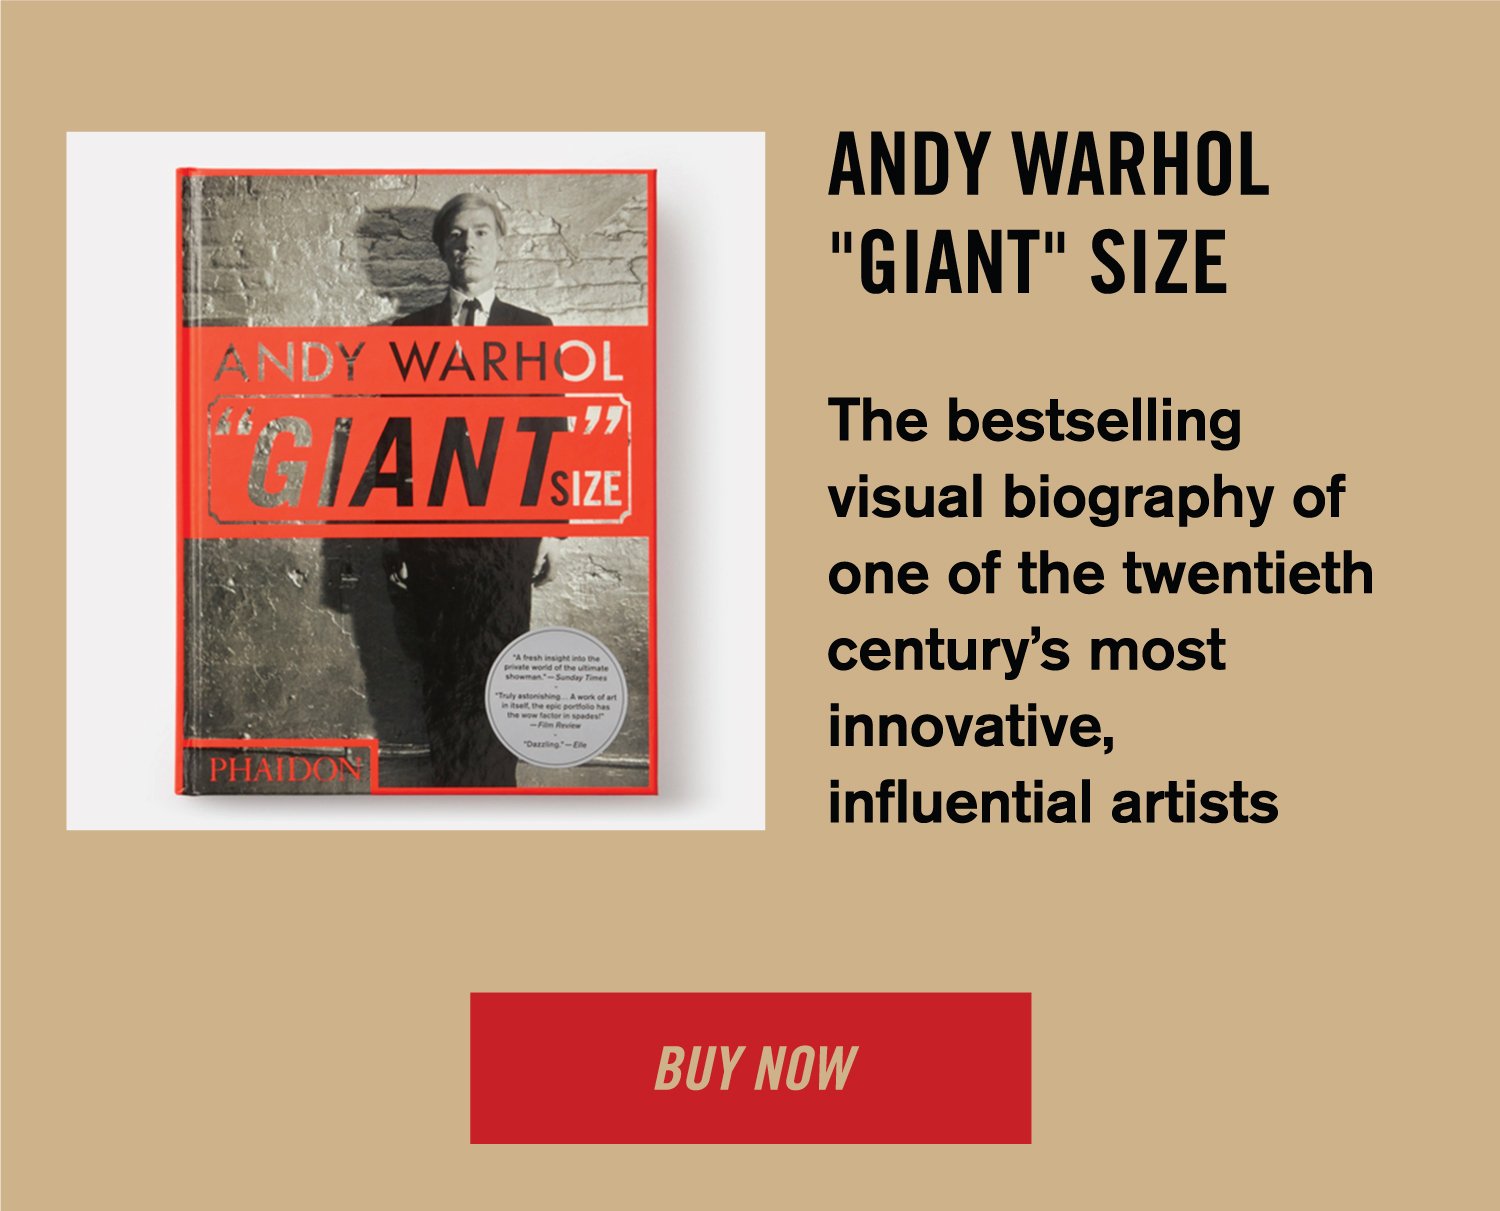 Andy Warhol "GIANT" Size